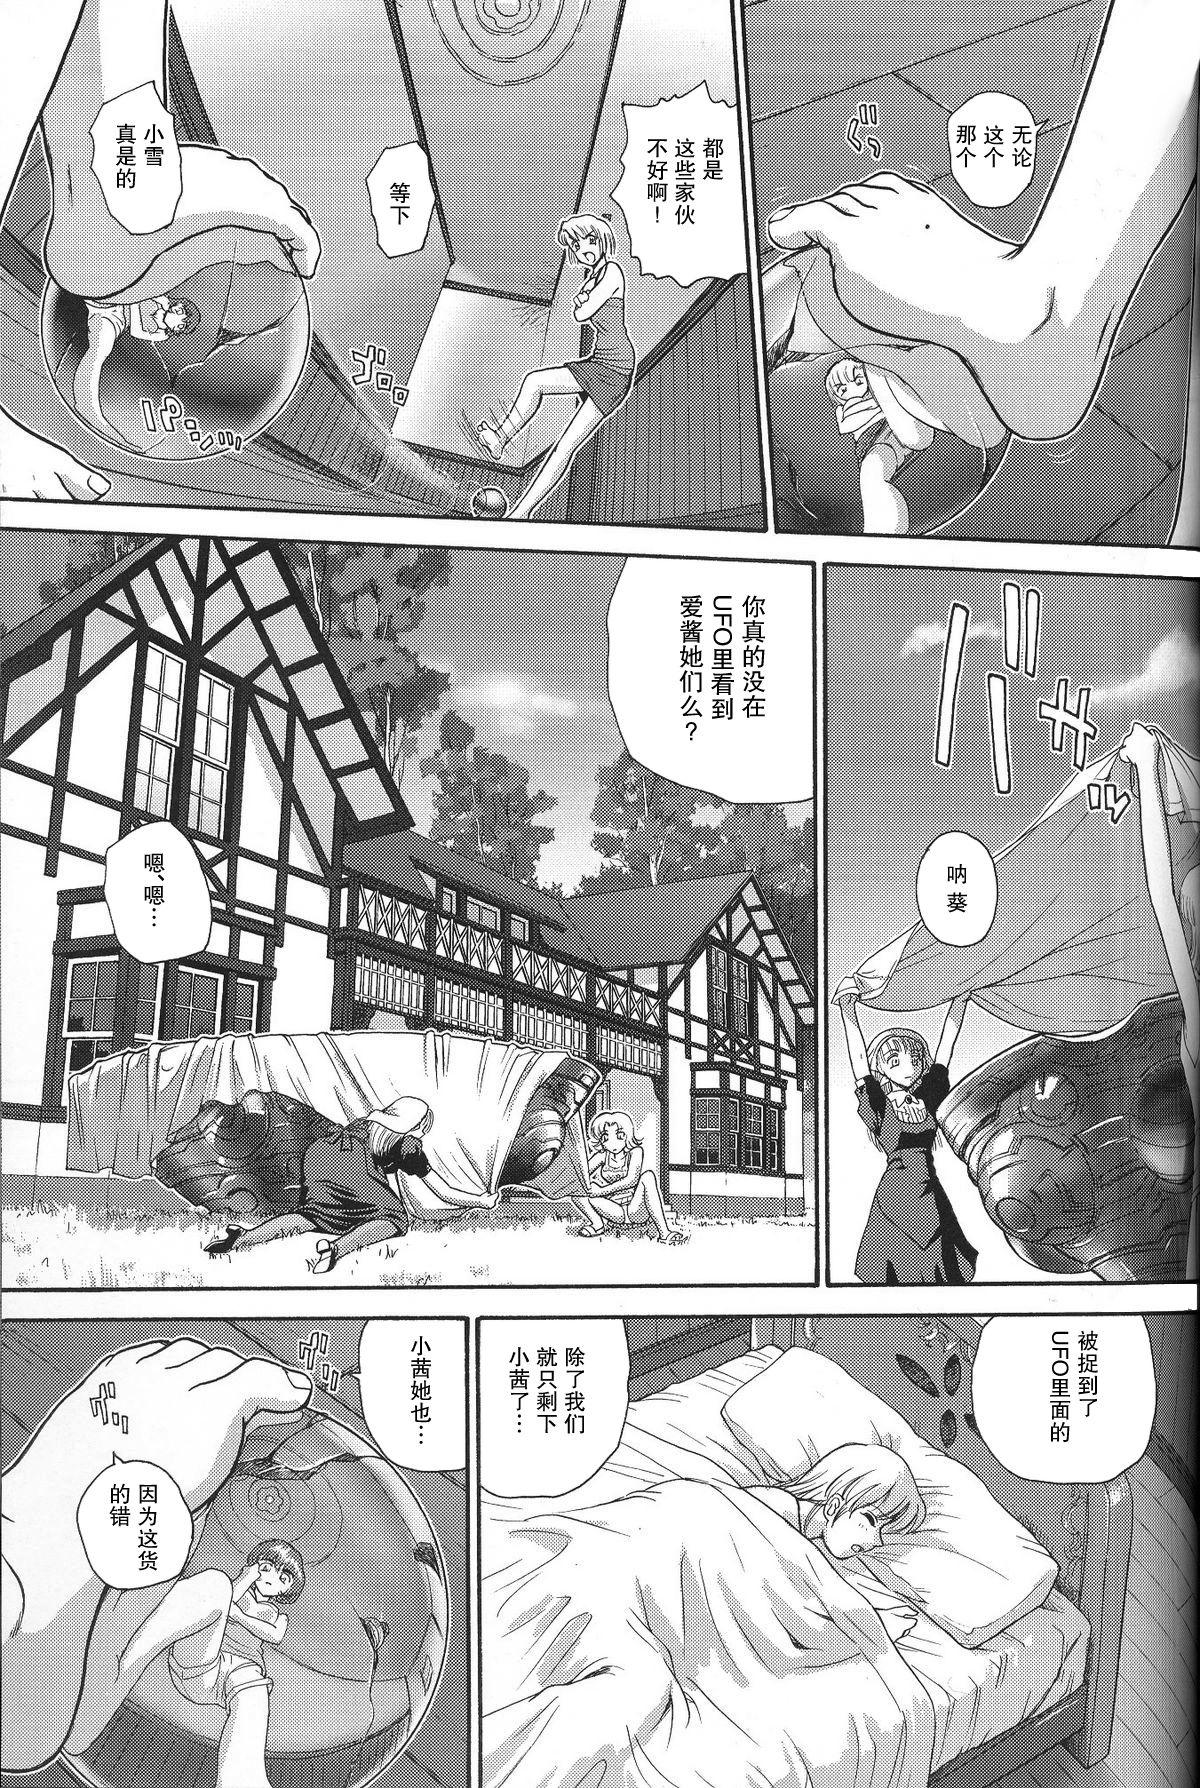 (C71) [Behind Moon (Q)] Dulce Report 8 | 达西报告 8 [Chinese] [哈尼喵汉化组] [Decensored] page 24 full